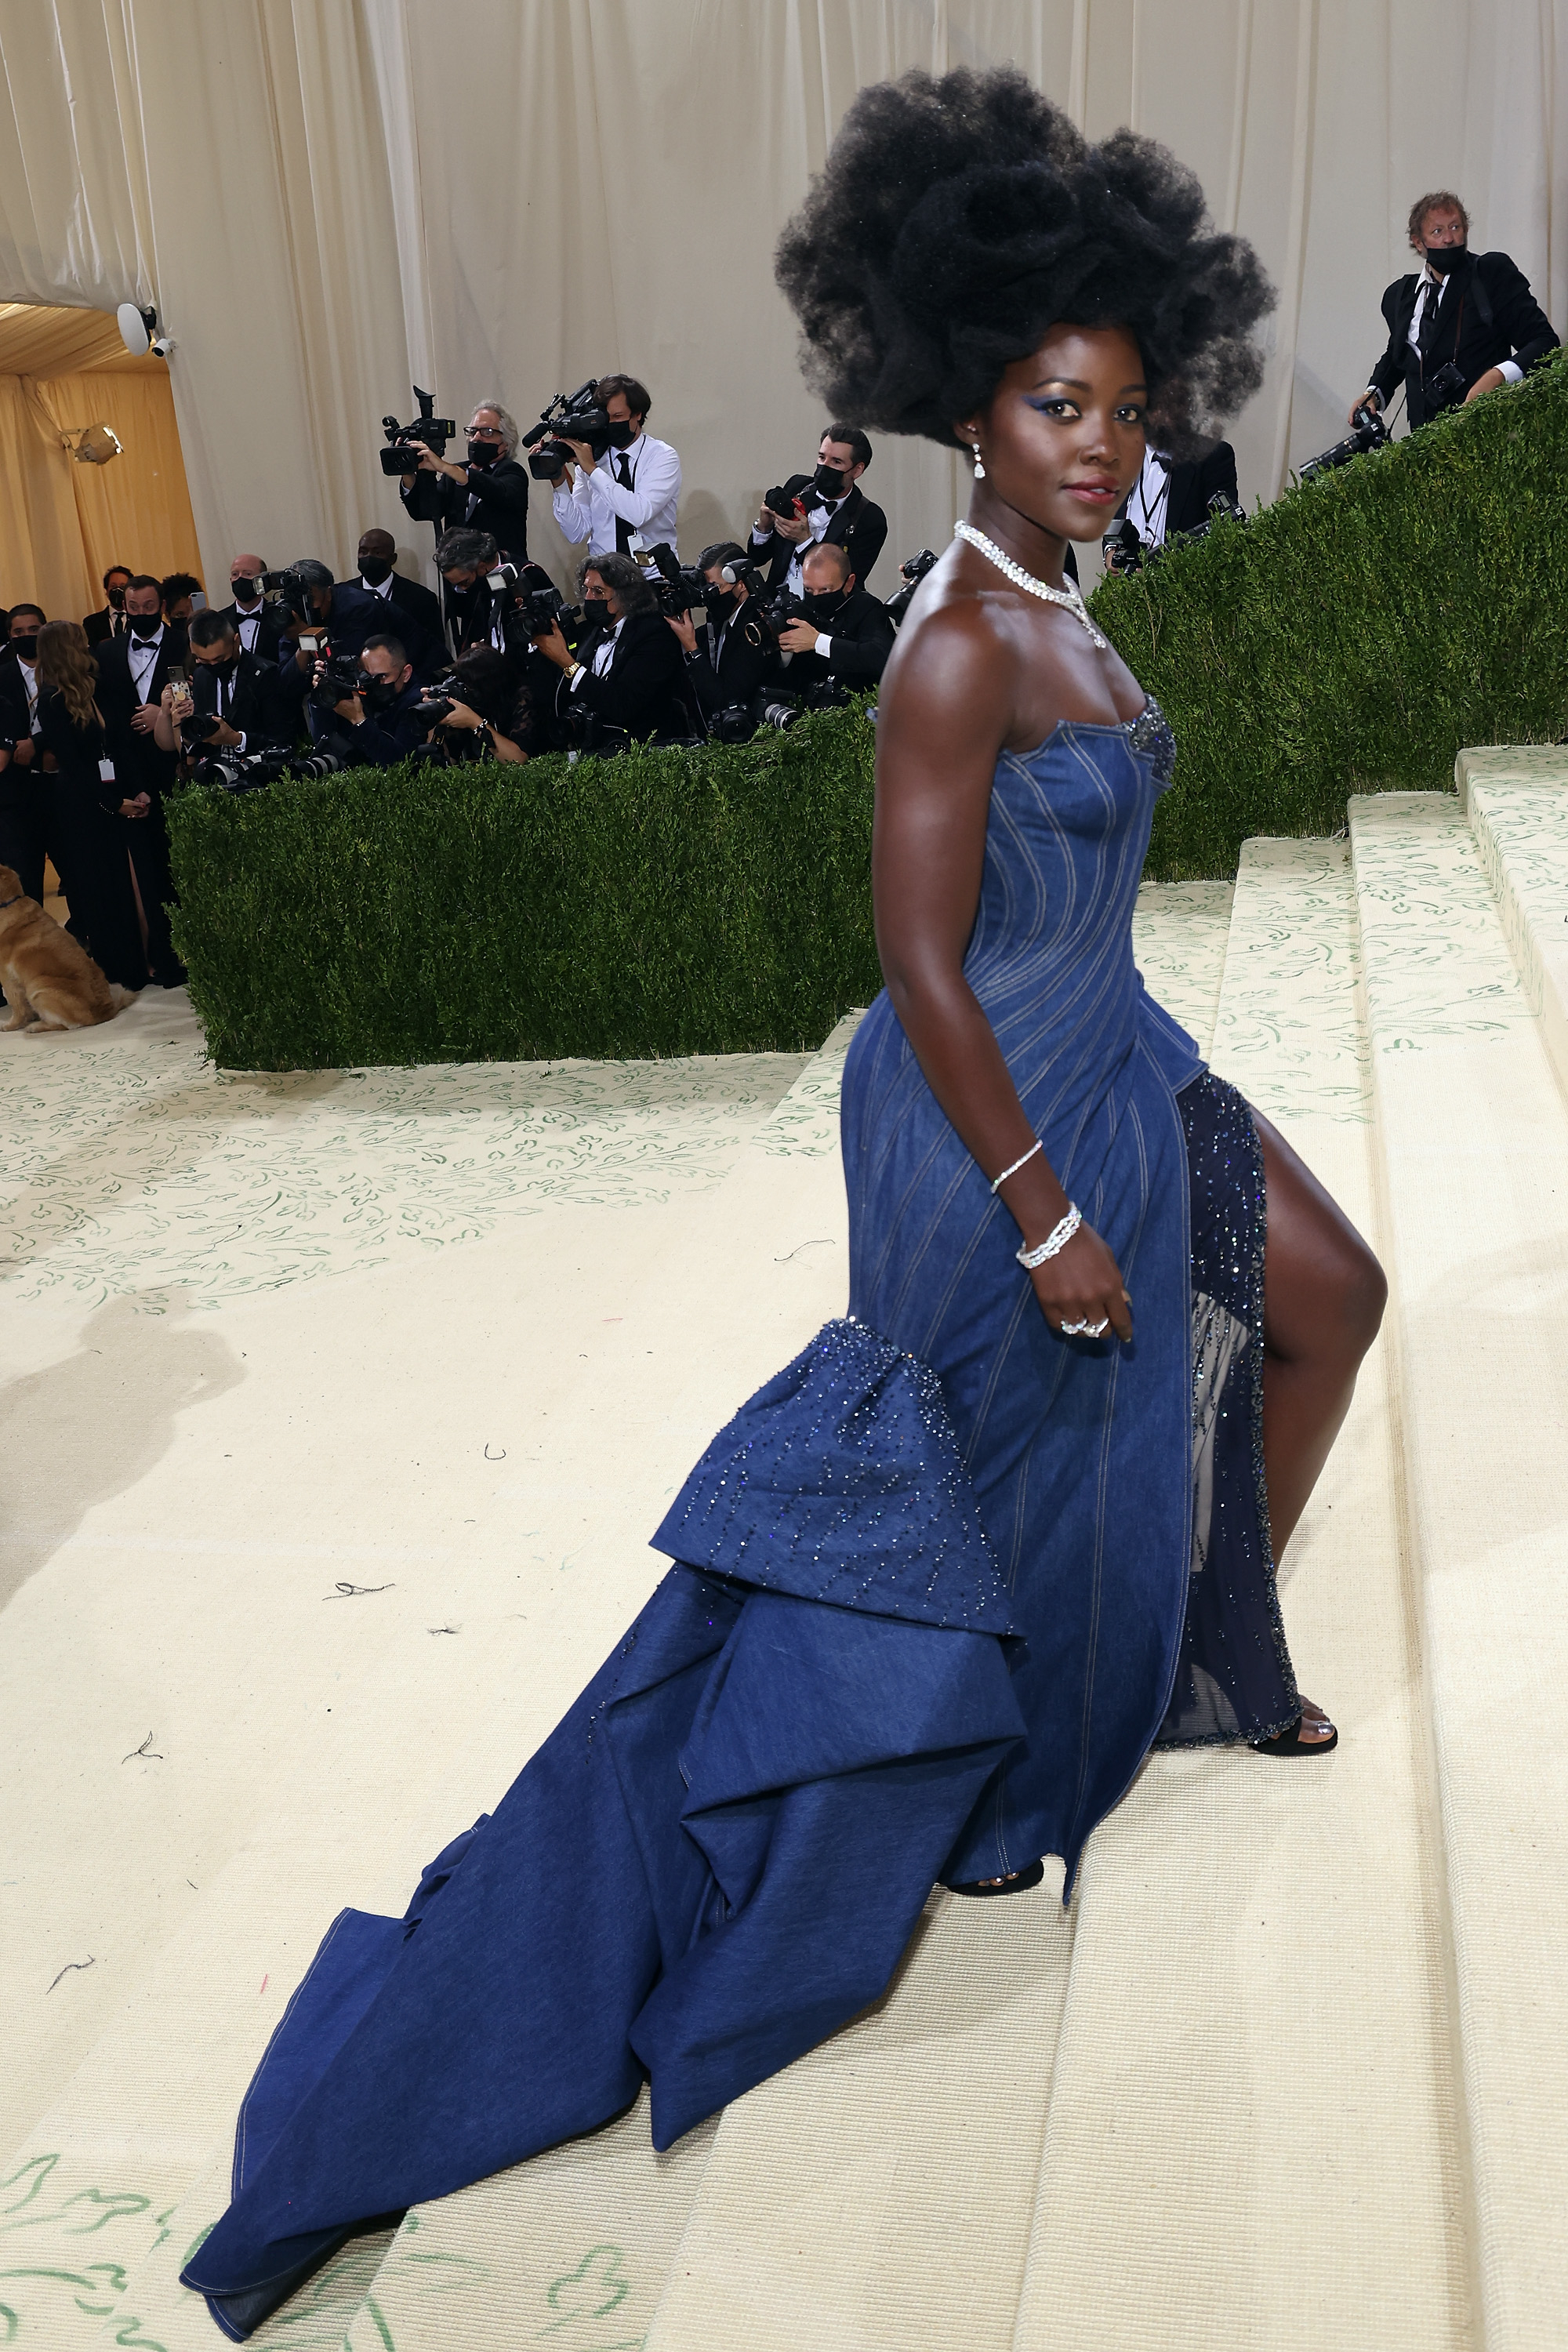 Viola Davis in a blue gown with a train, posing on steps at an event. Photographers in the background